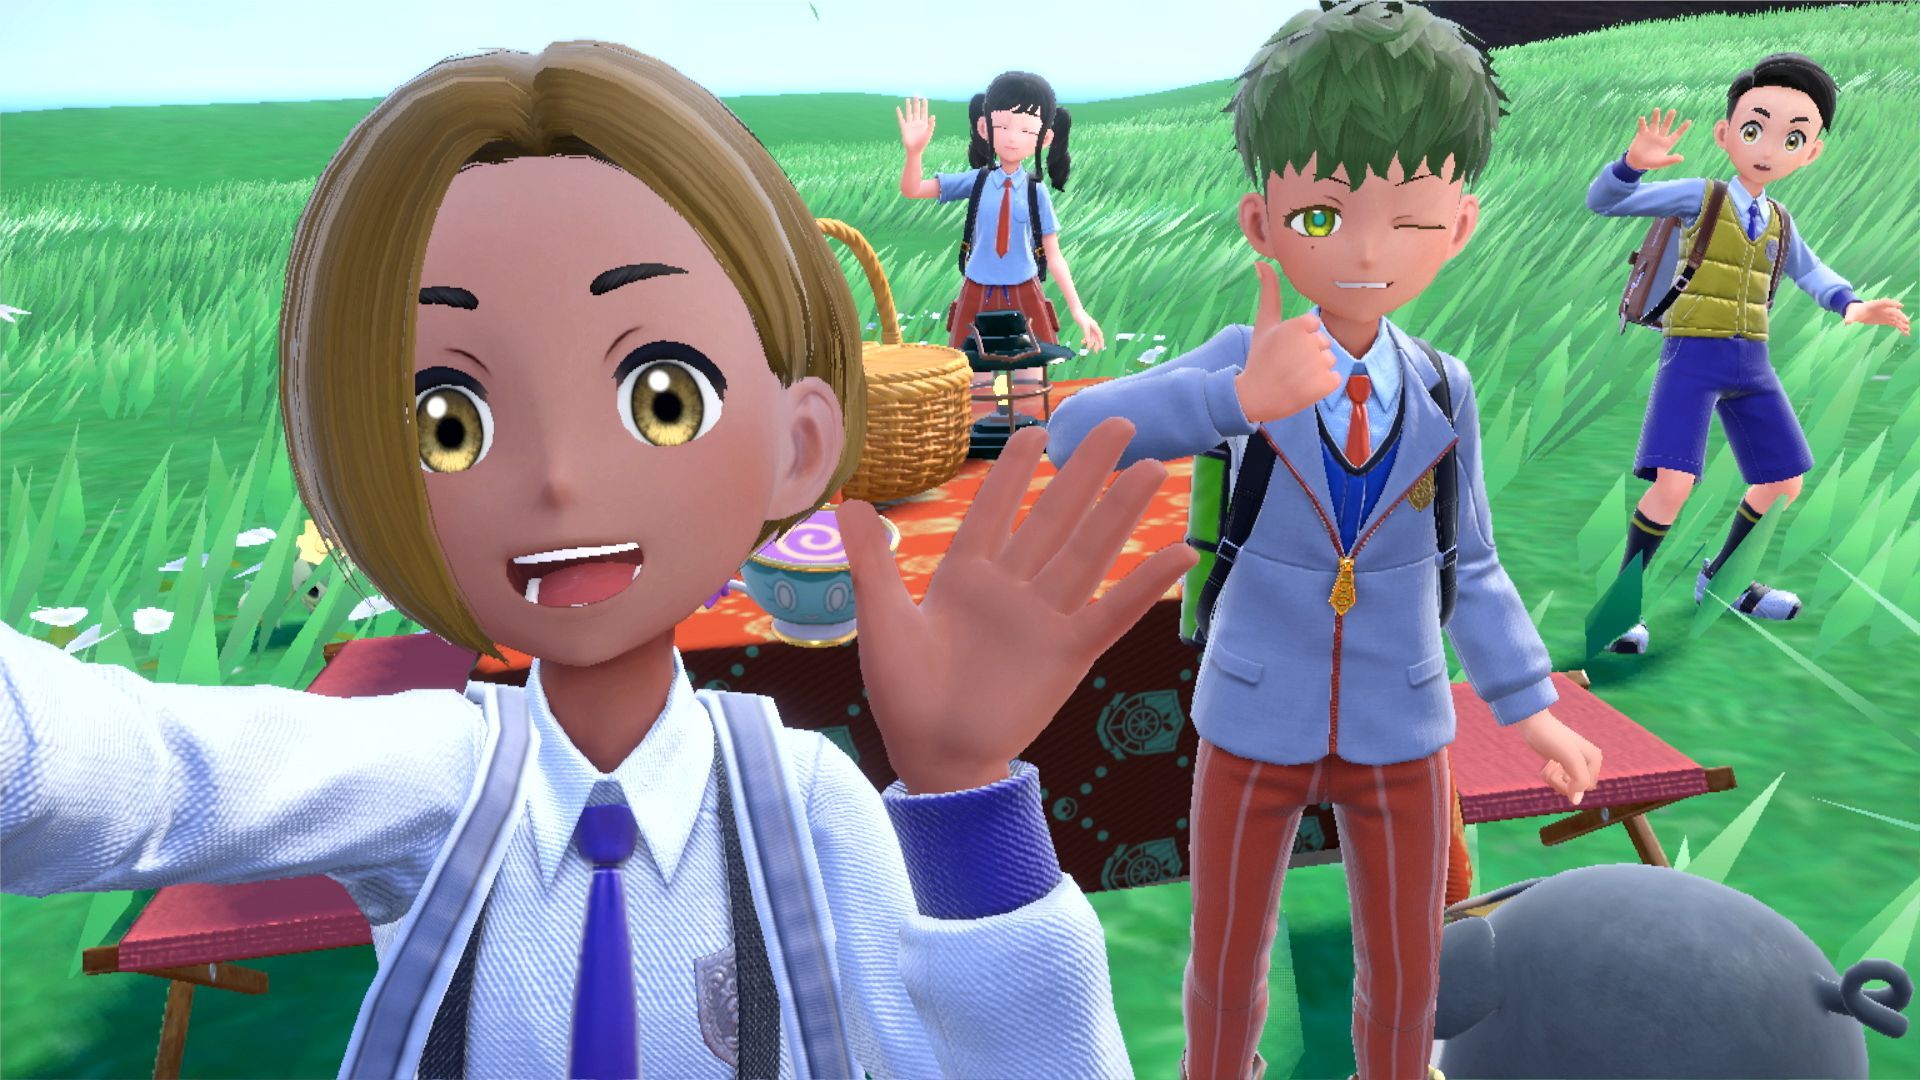 A girl Pokemon character waves at the camera as she takes a selfie. Other trainers pose in the background.